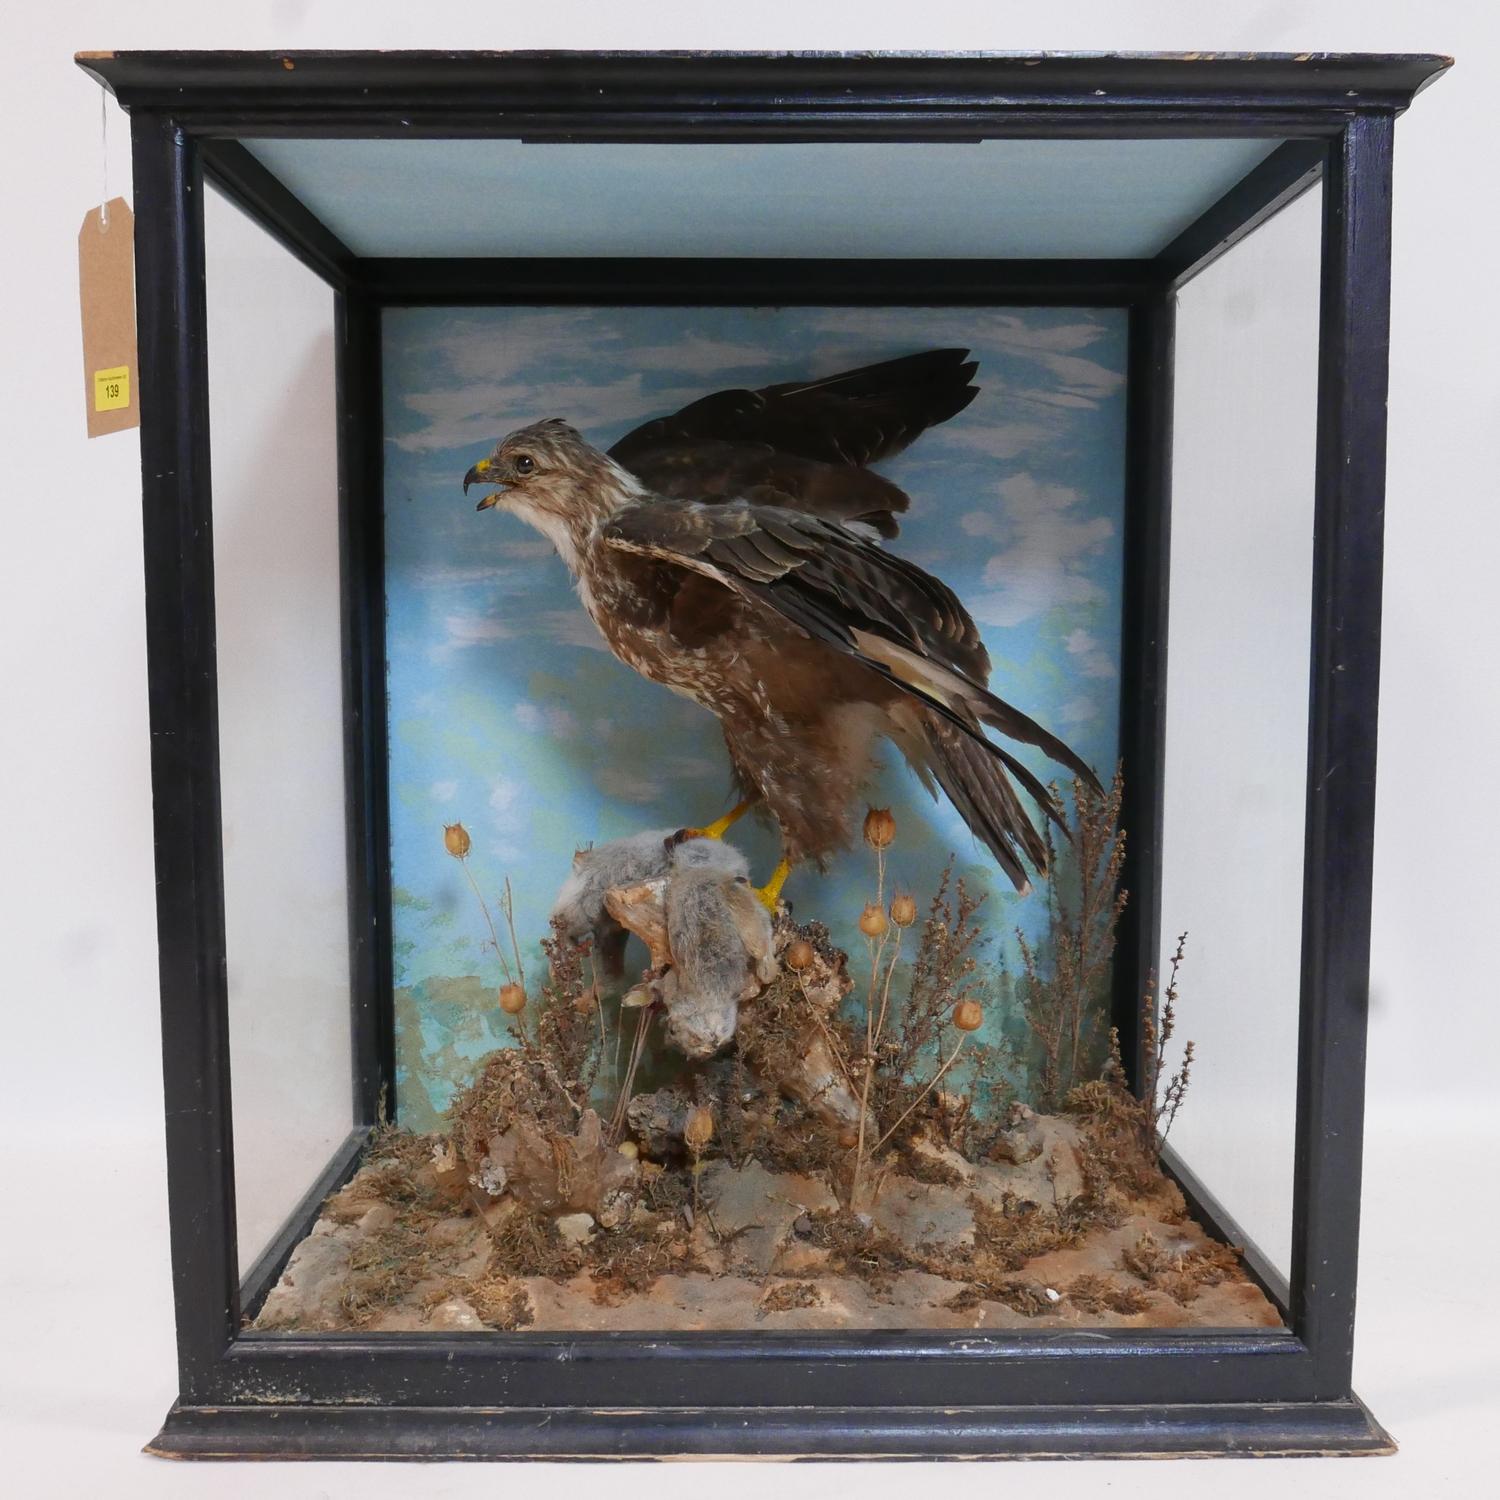 A taxidermy study of a hawk catching a rabbit set in display case, H.74 W.70 D.43cm